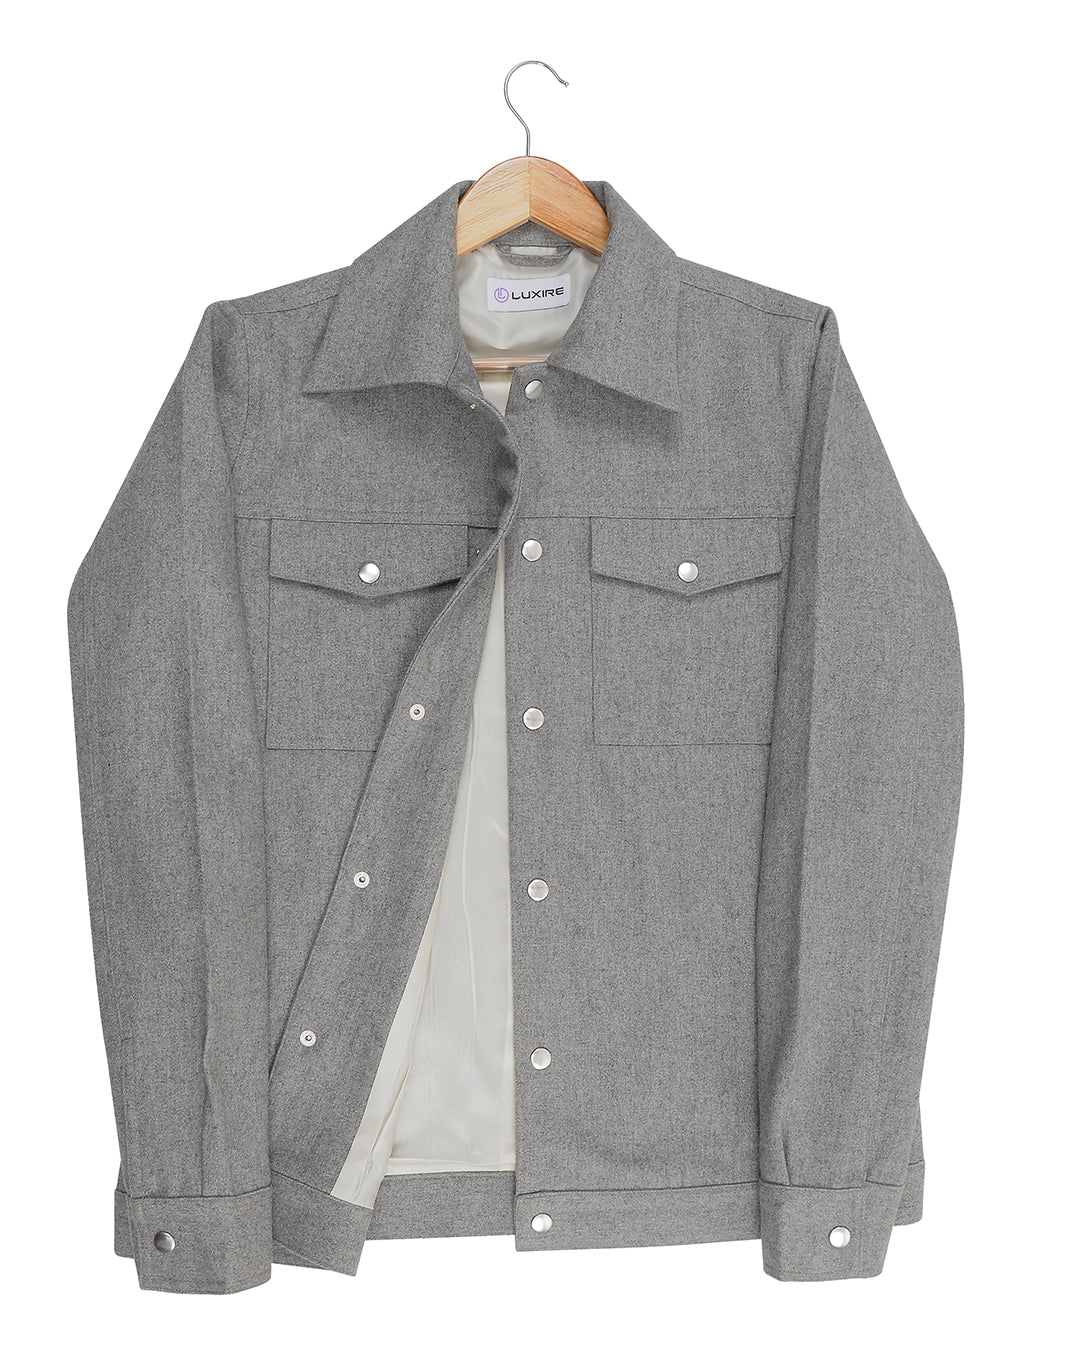 Front of the recycled wool shirt jacket for men by Luxire in grey